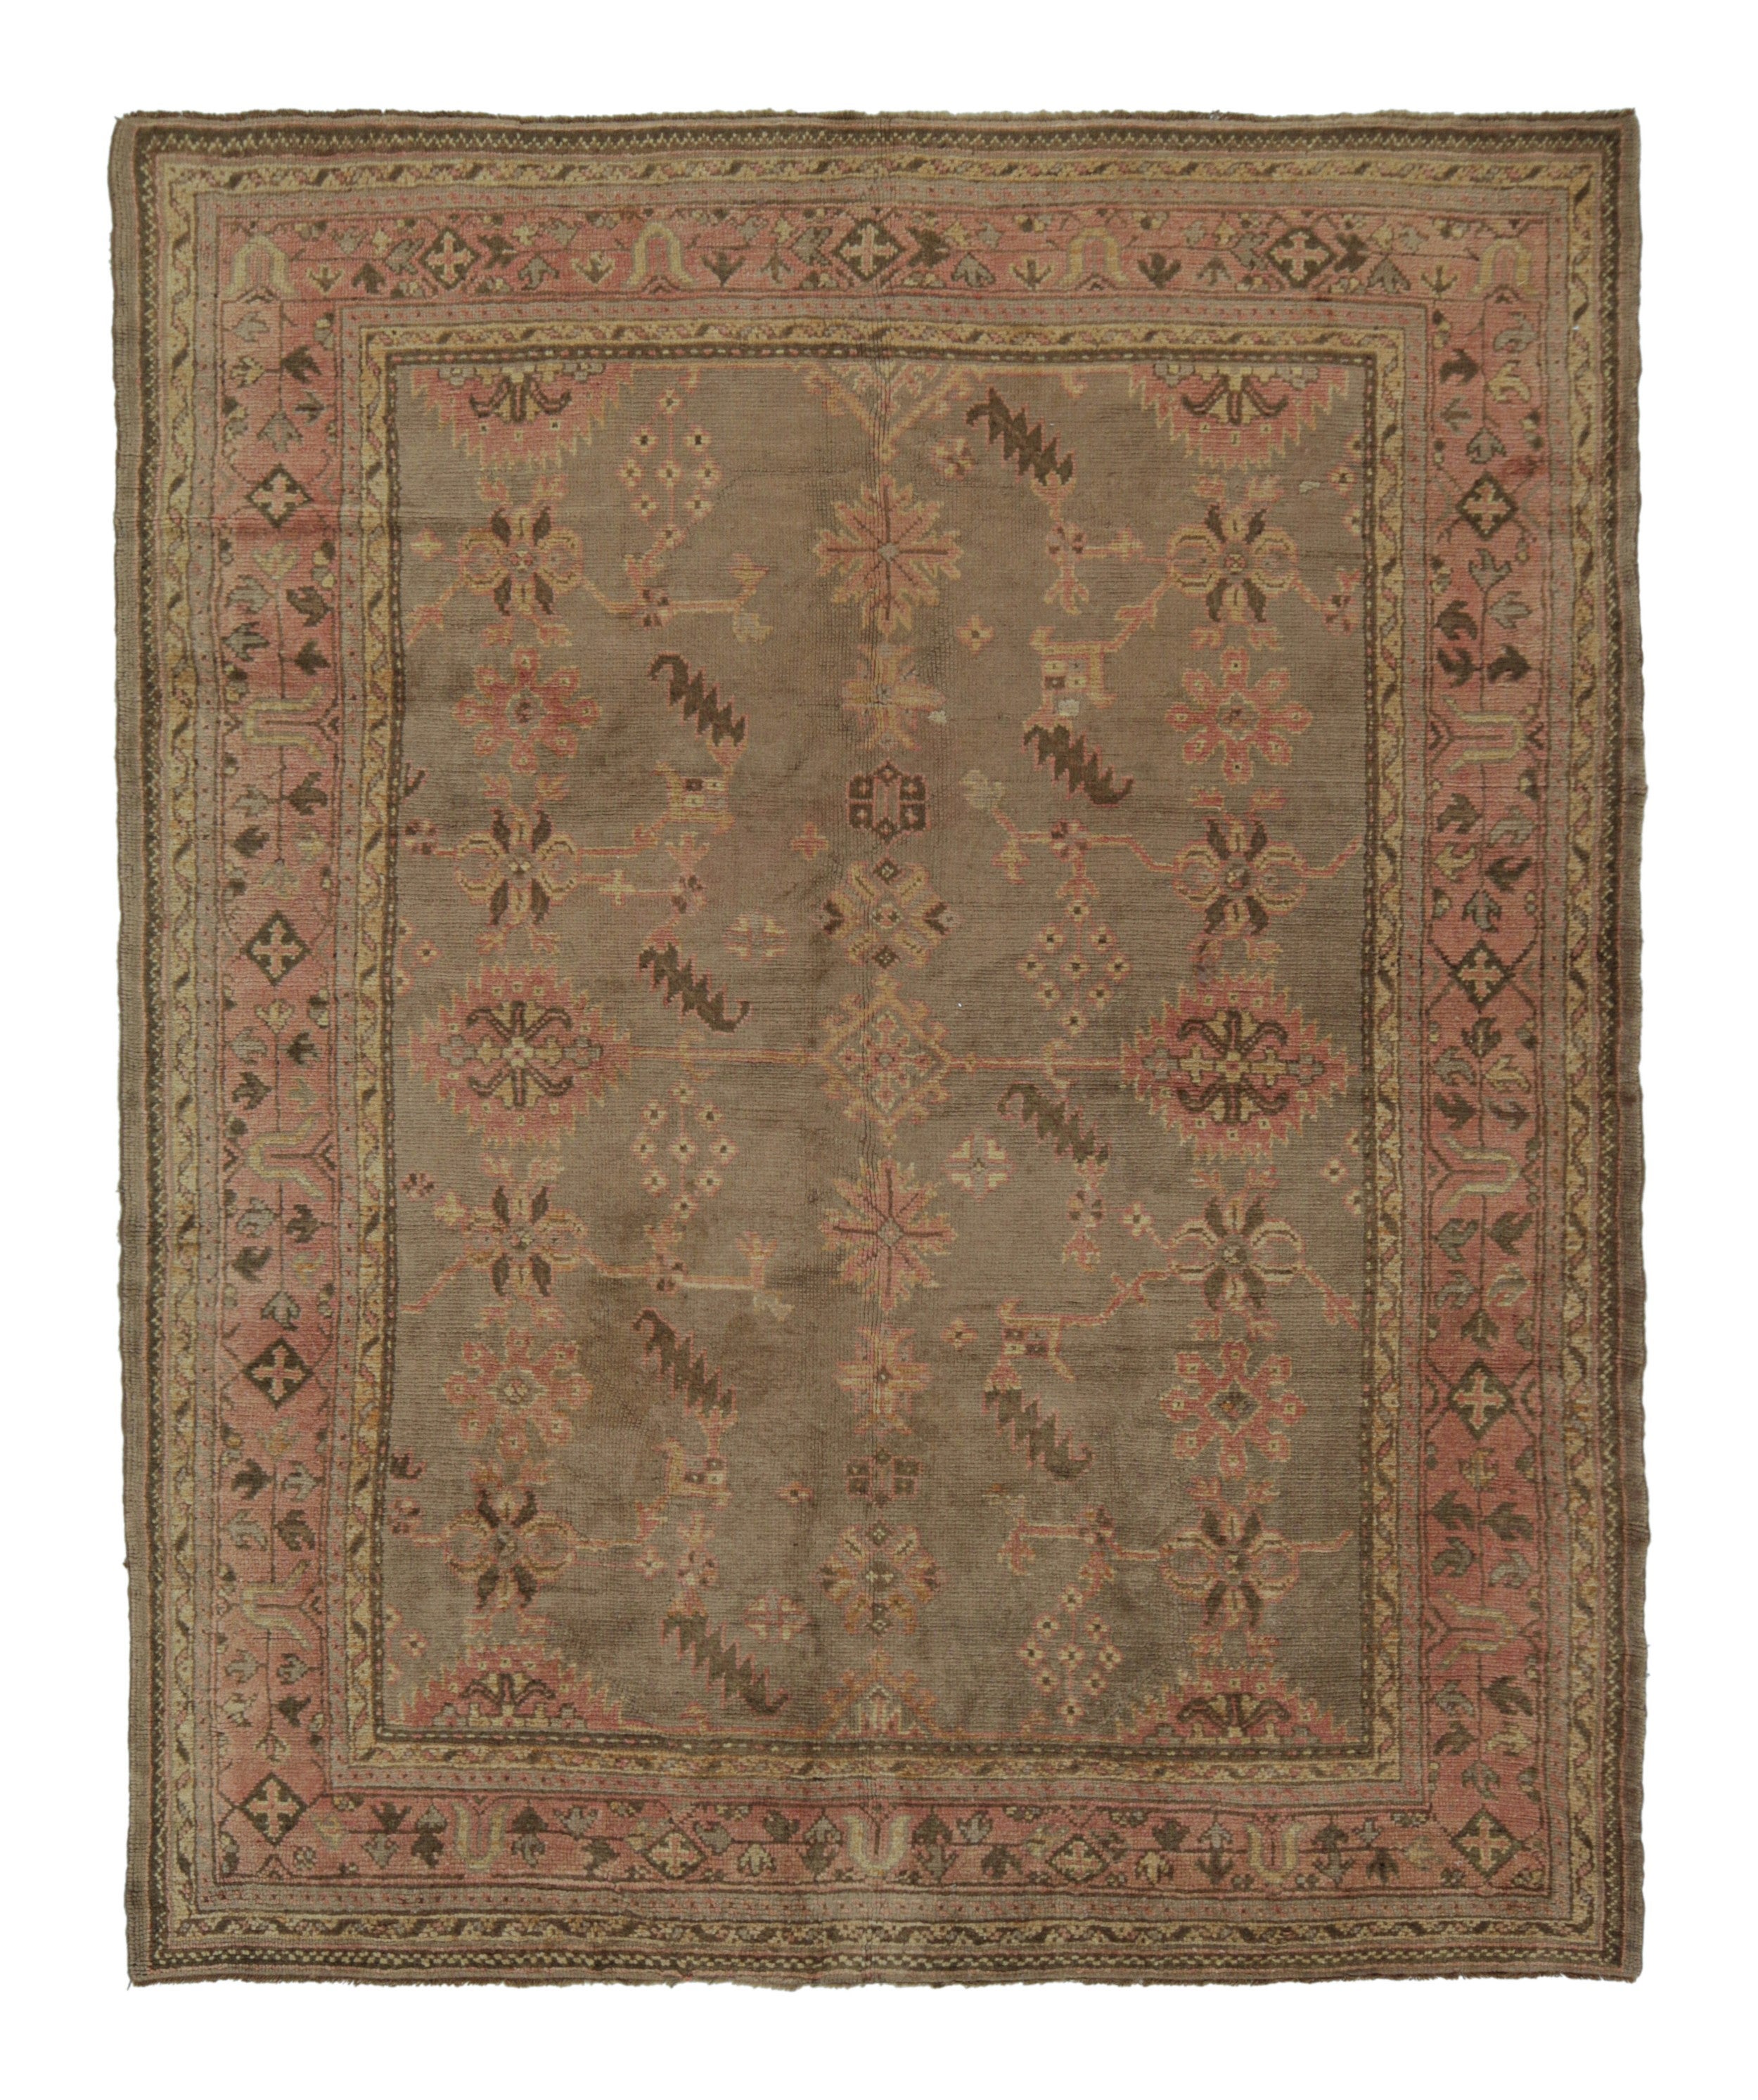 Vintage Oushak Rug with Beige-Brown and Pink Floral Patterns, from Rug & Kilim For Sale